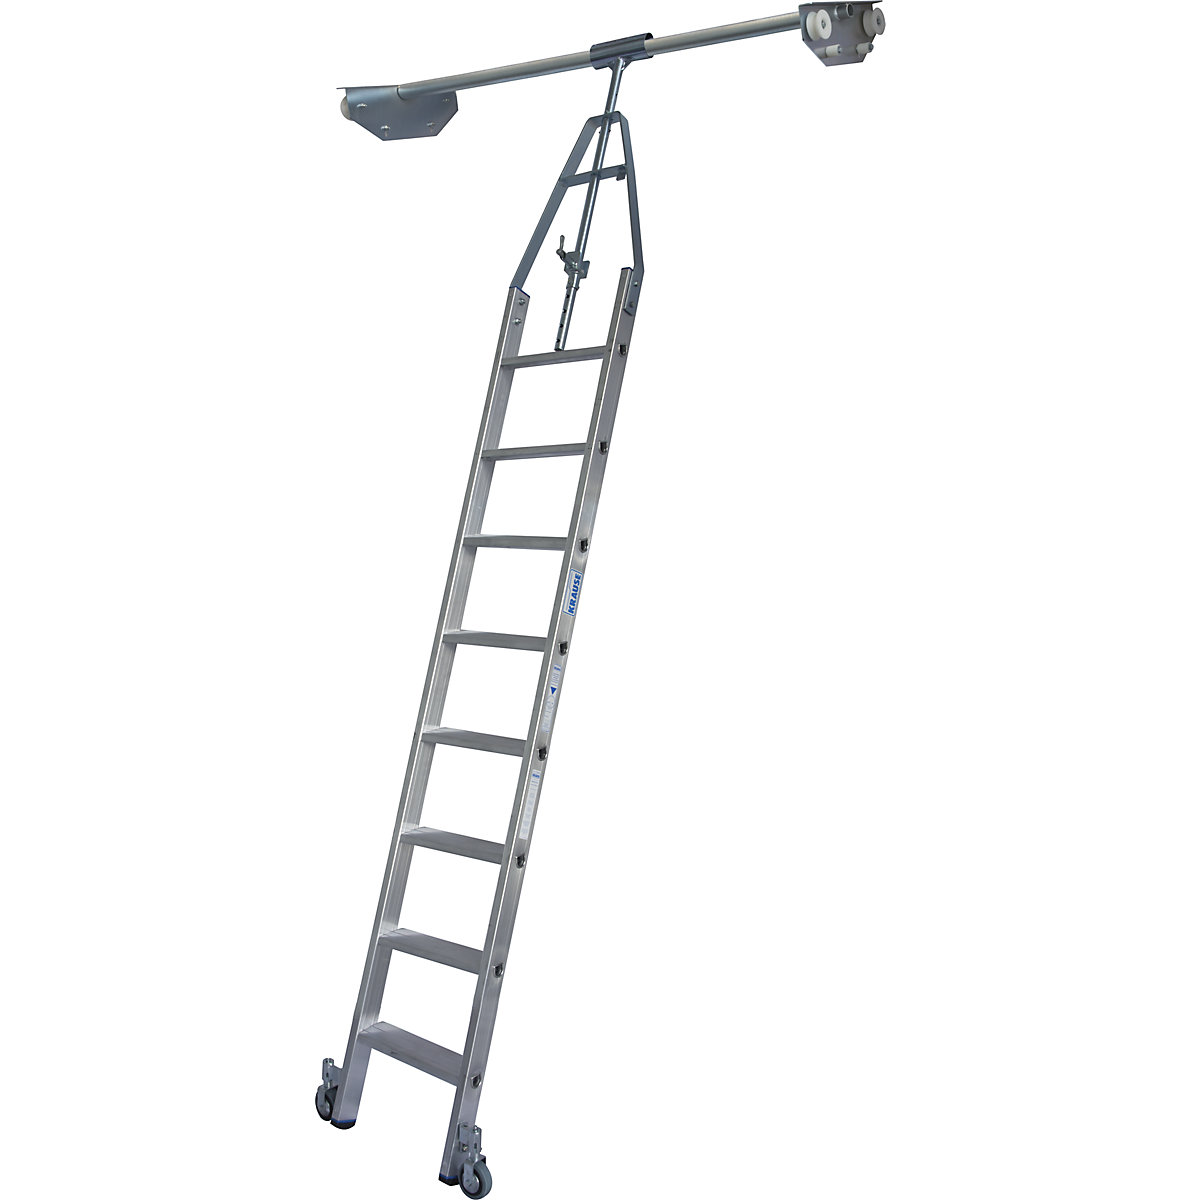 Step shelf ladder – KRAUSE, double sided shelf unit with wheel unit on top for round tubing rail system, 8 steps-7